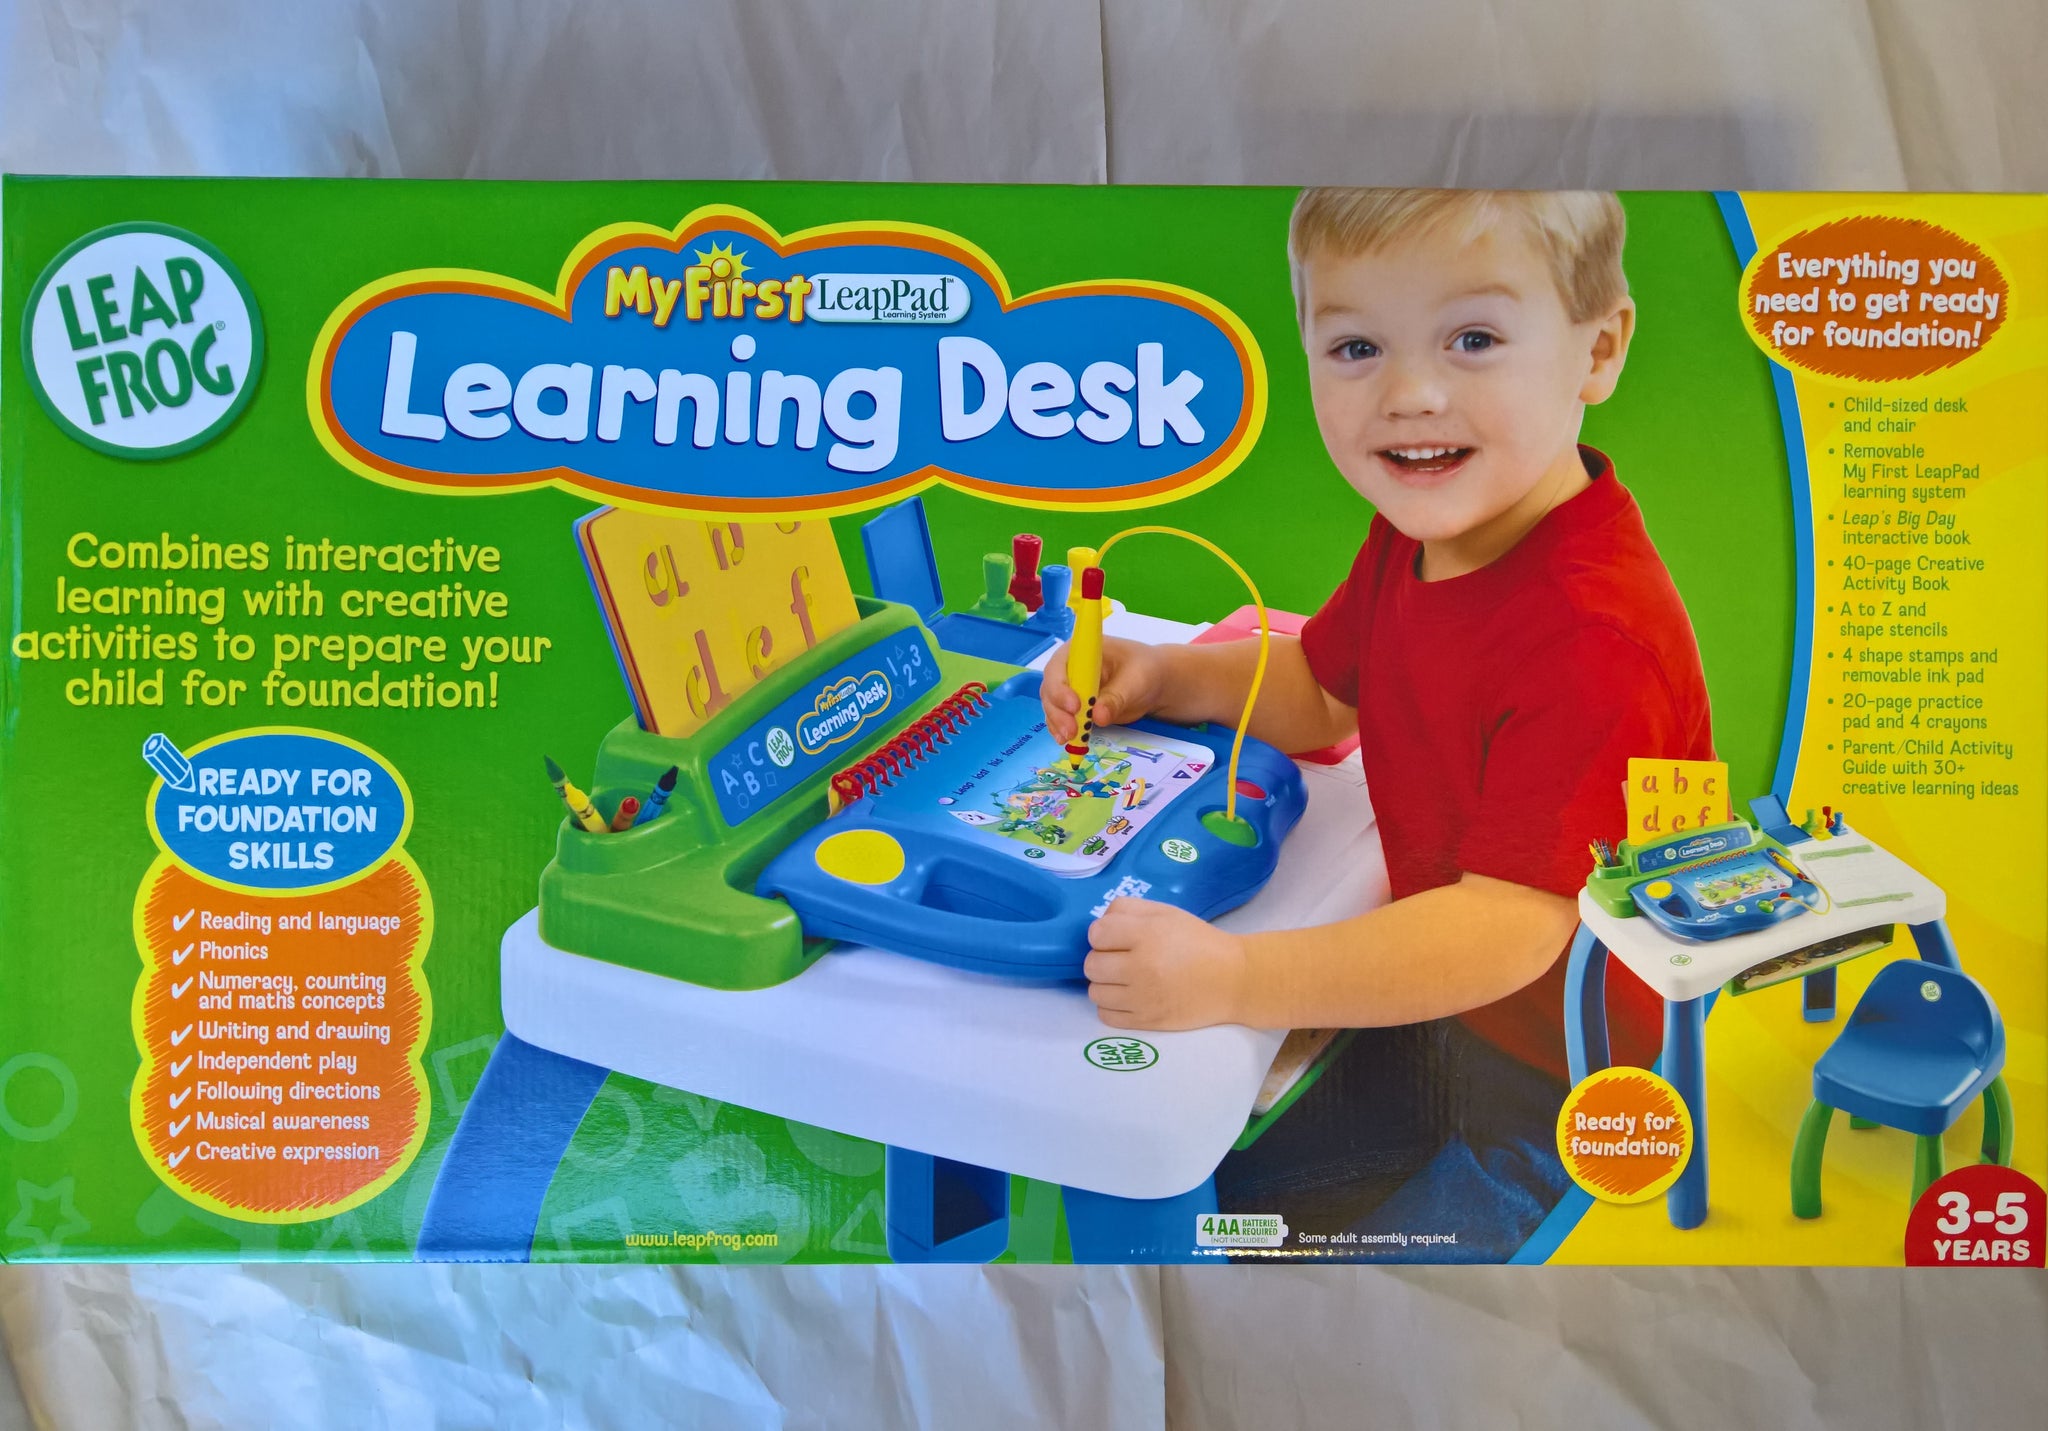 1 Leap Frog My First Leappad Learning Desk Chair Child Furniture